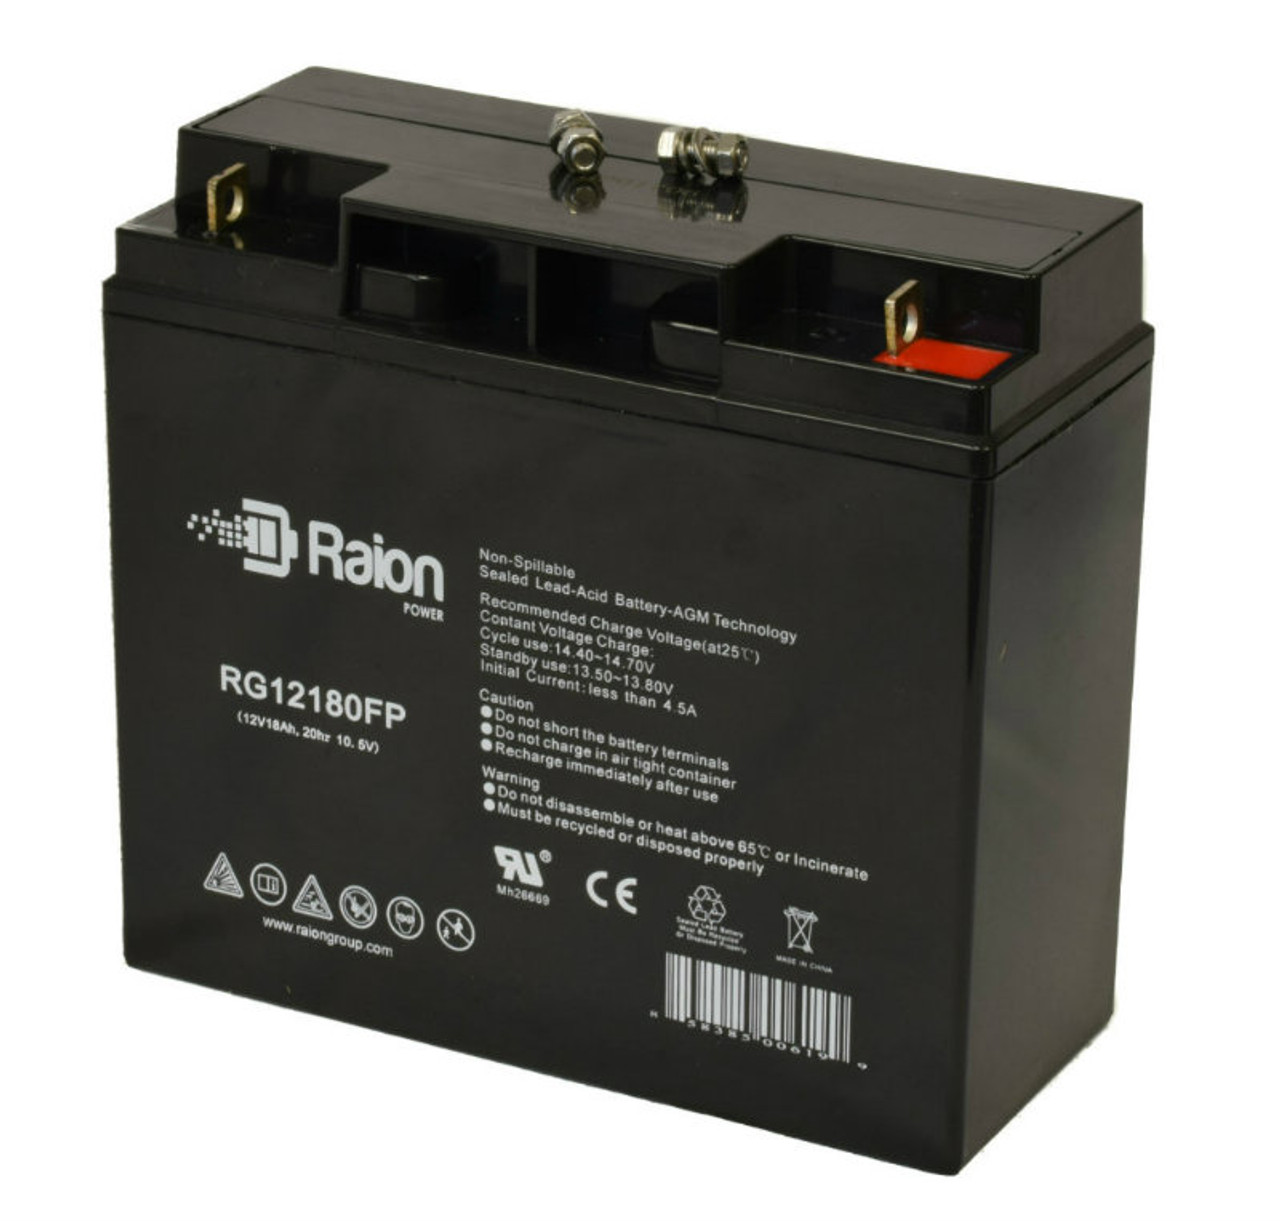 Raion Power Replacement 12V 18Ah Battery for FIAMM FG21803 - 1 Pack